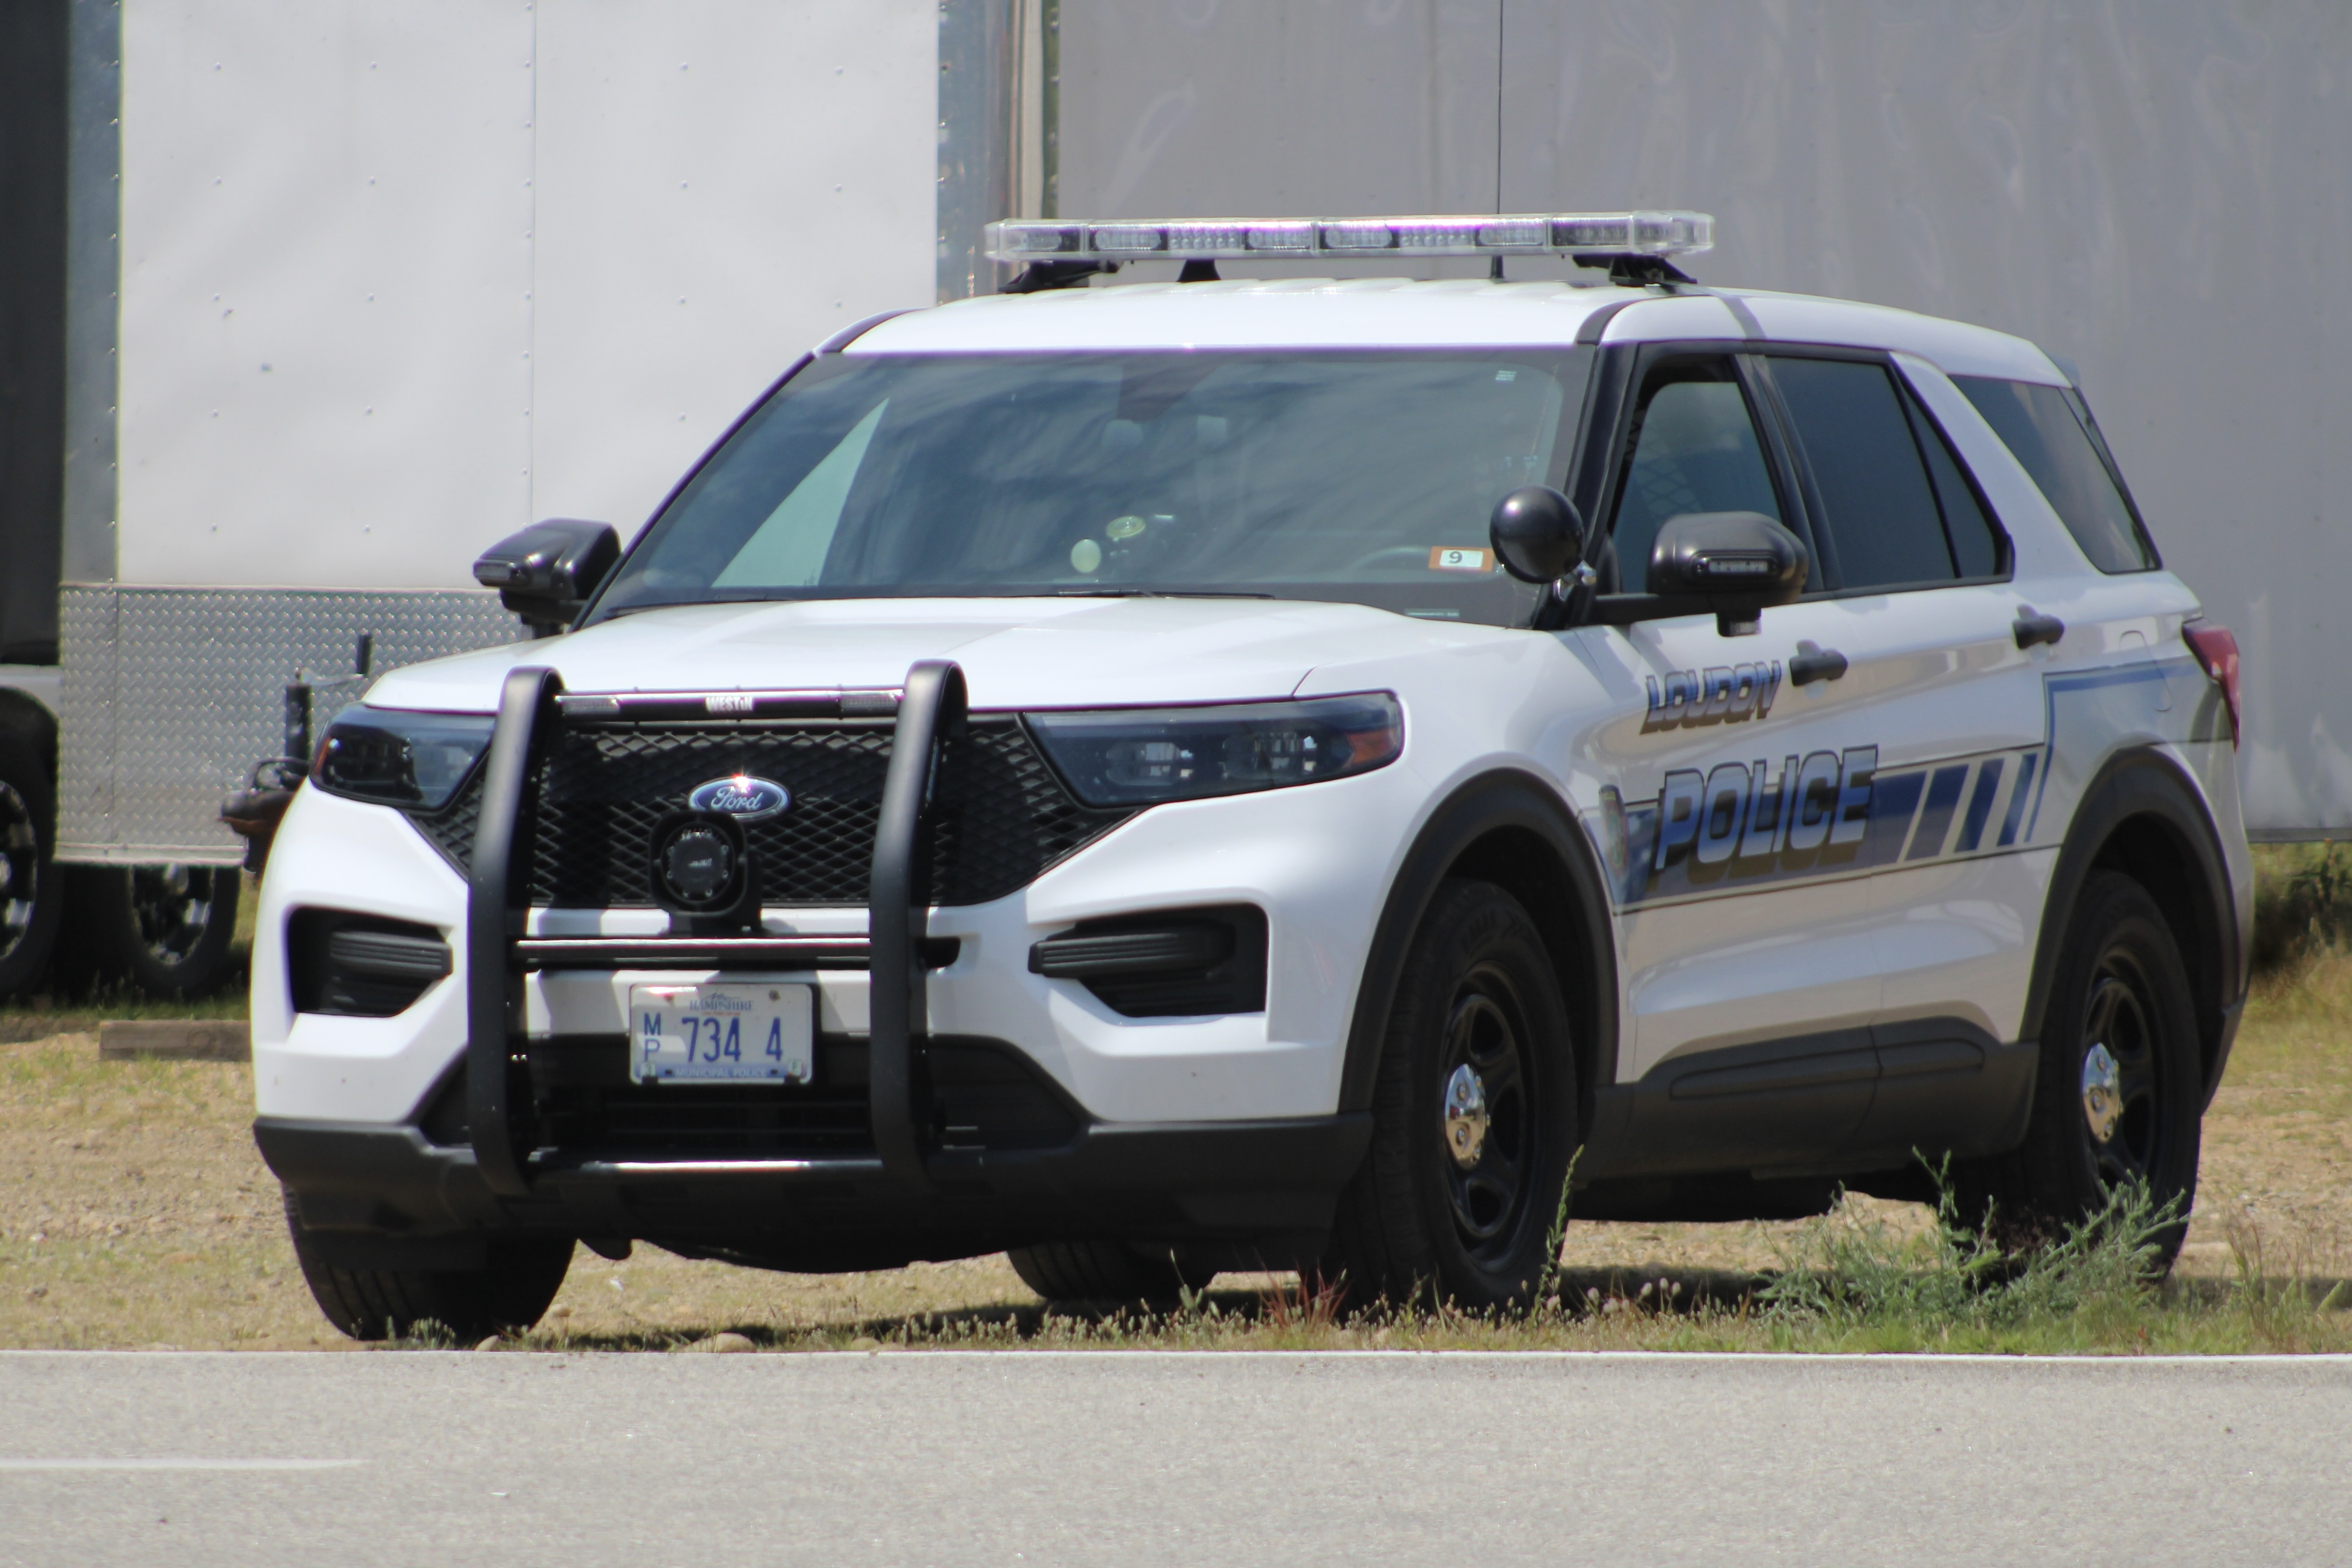 A photo  of Loudon Police
            Car 4, a 2020-2021 Ford Police Interceptor Utility             taken by @riemergencyvehicles